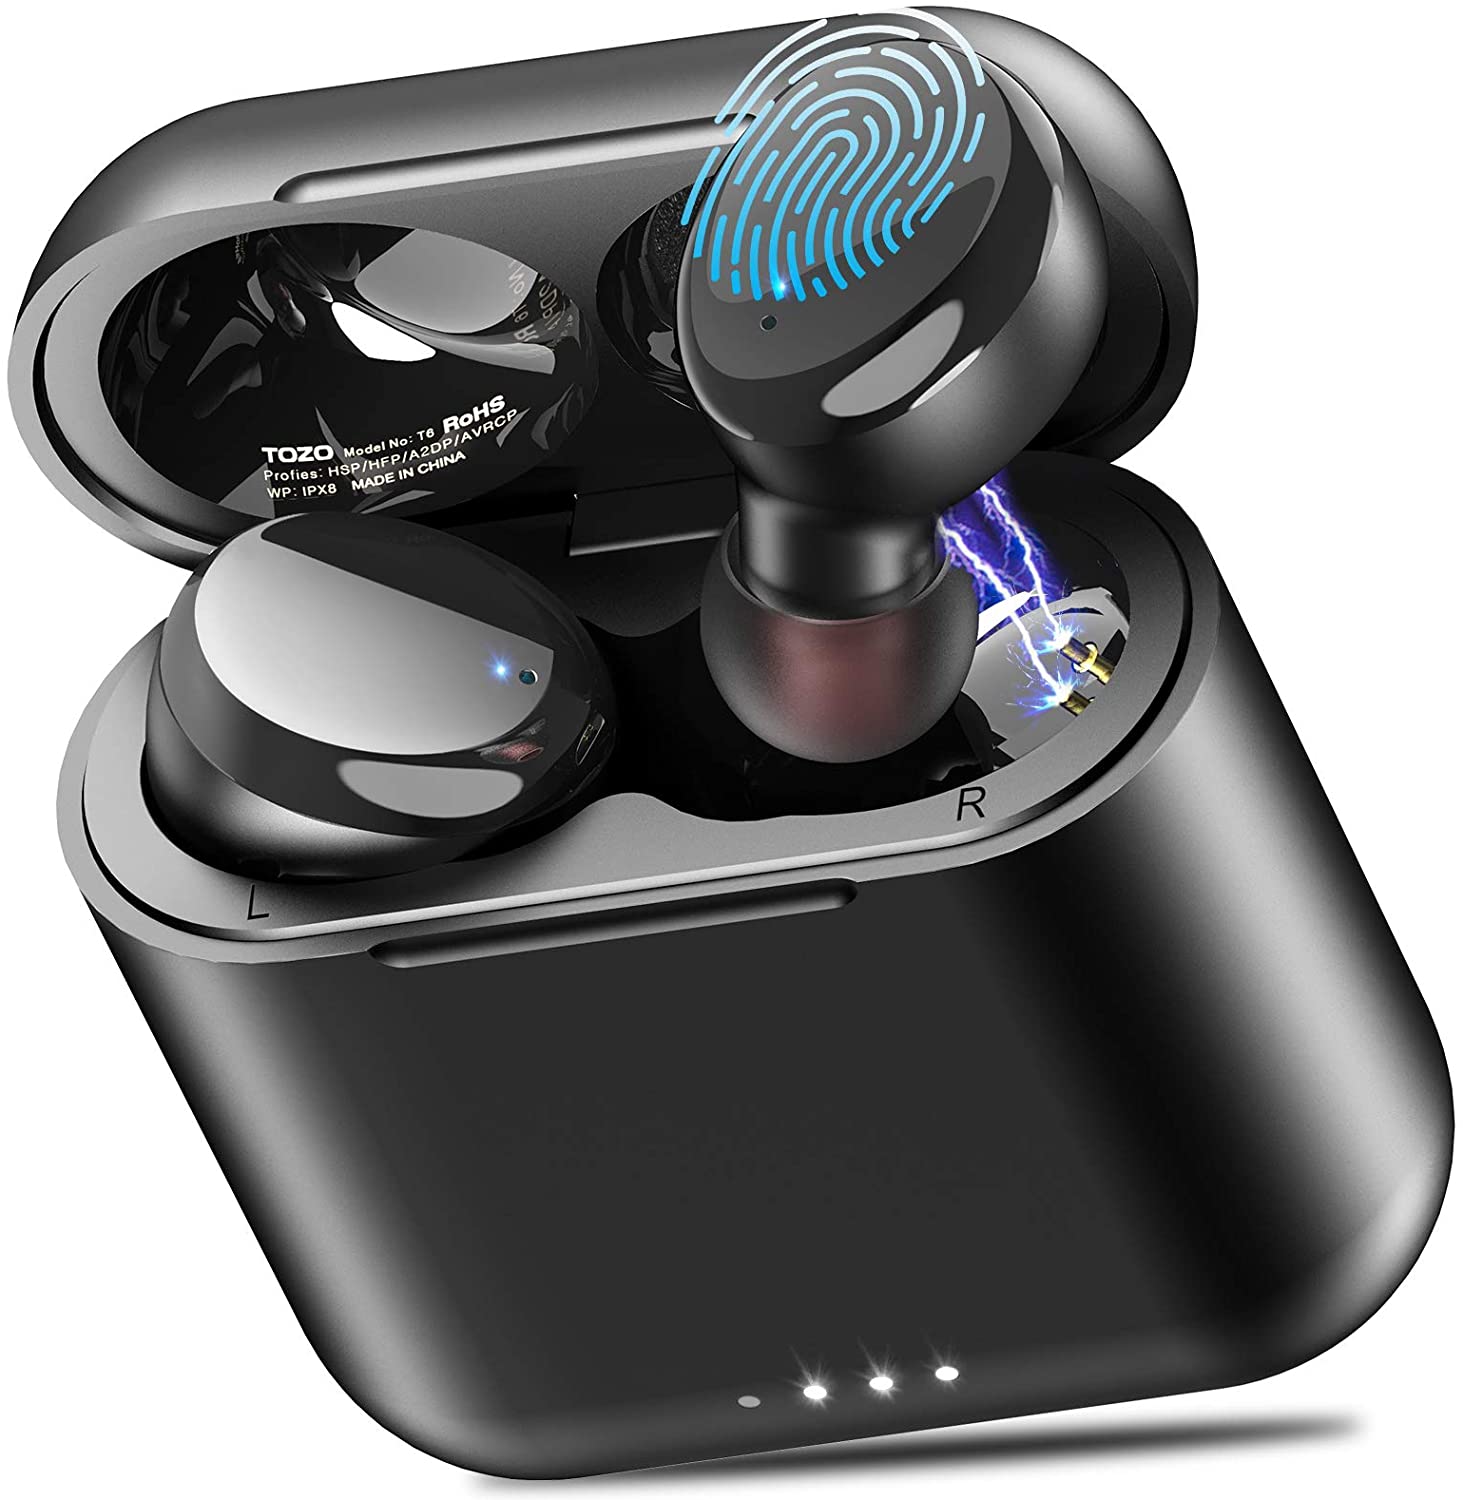 Wireless Earbuds Bluetooth Headphones Touch Control with Wireless Charging Waterproof